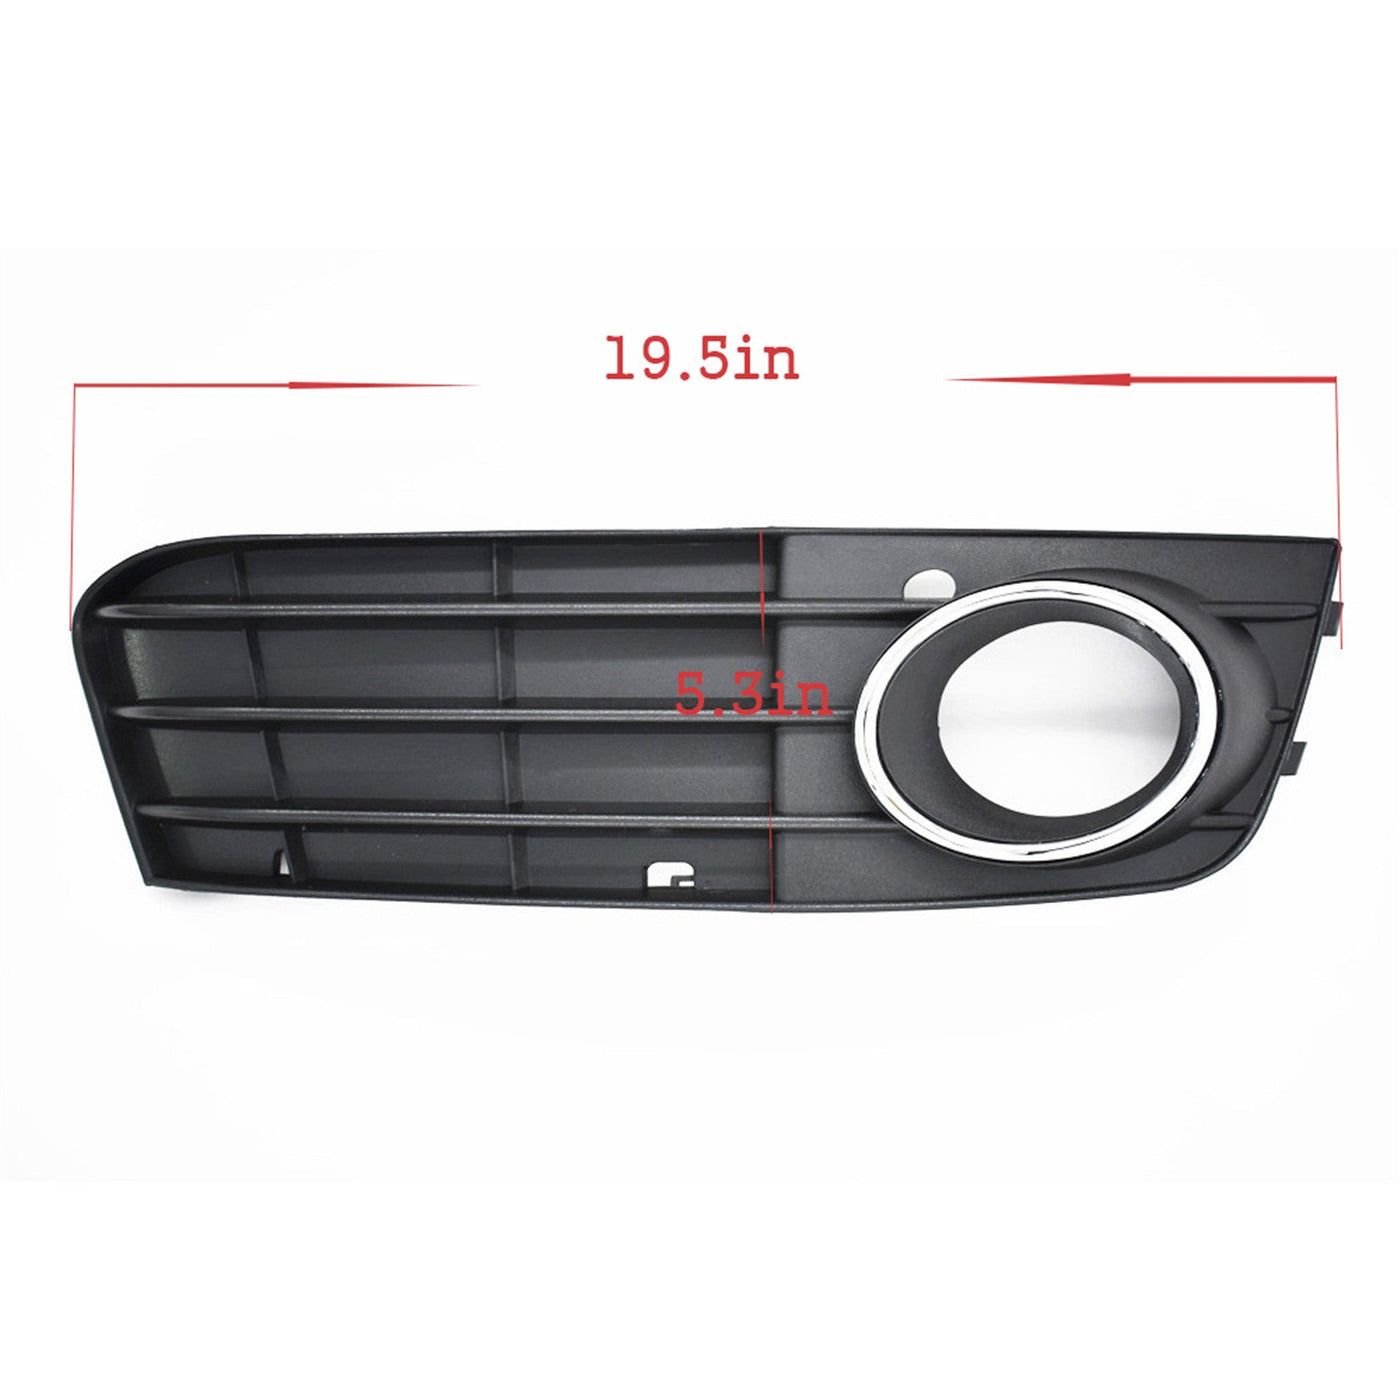 New Pair Front Bumper Fog Light Grille Grill Cover For Audi A4 B8 A4L 2009-2012